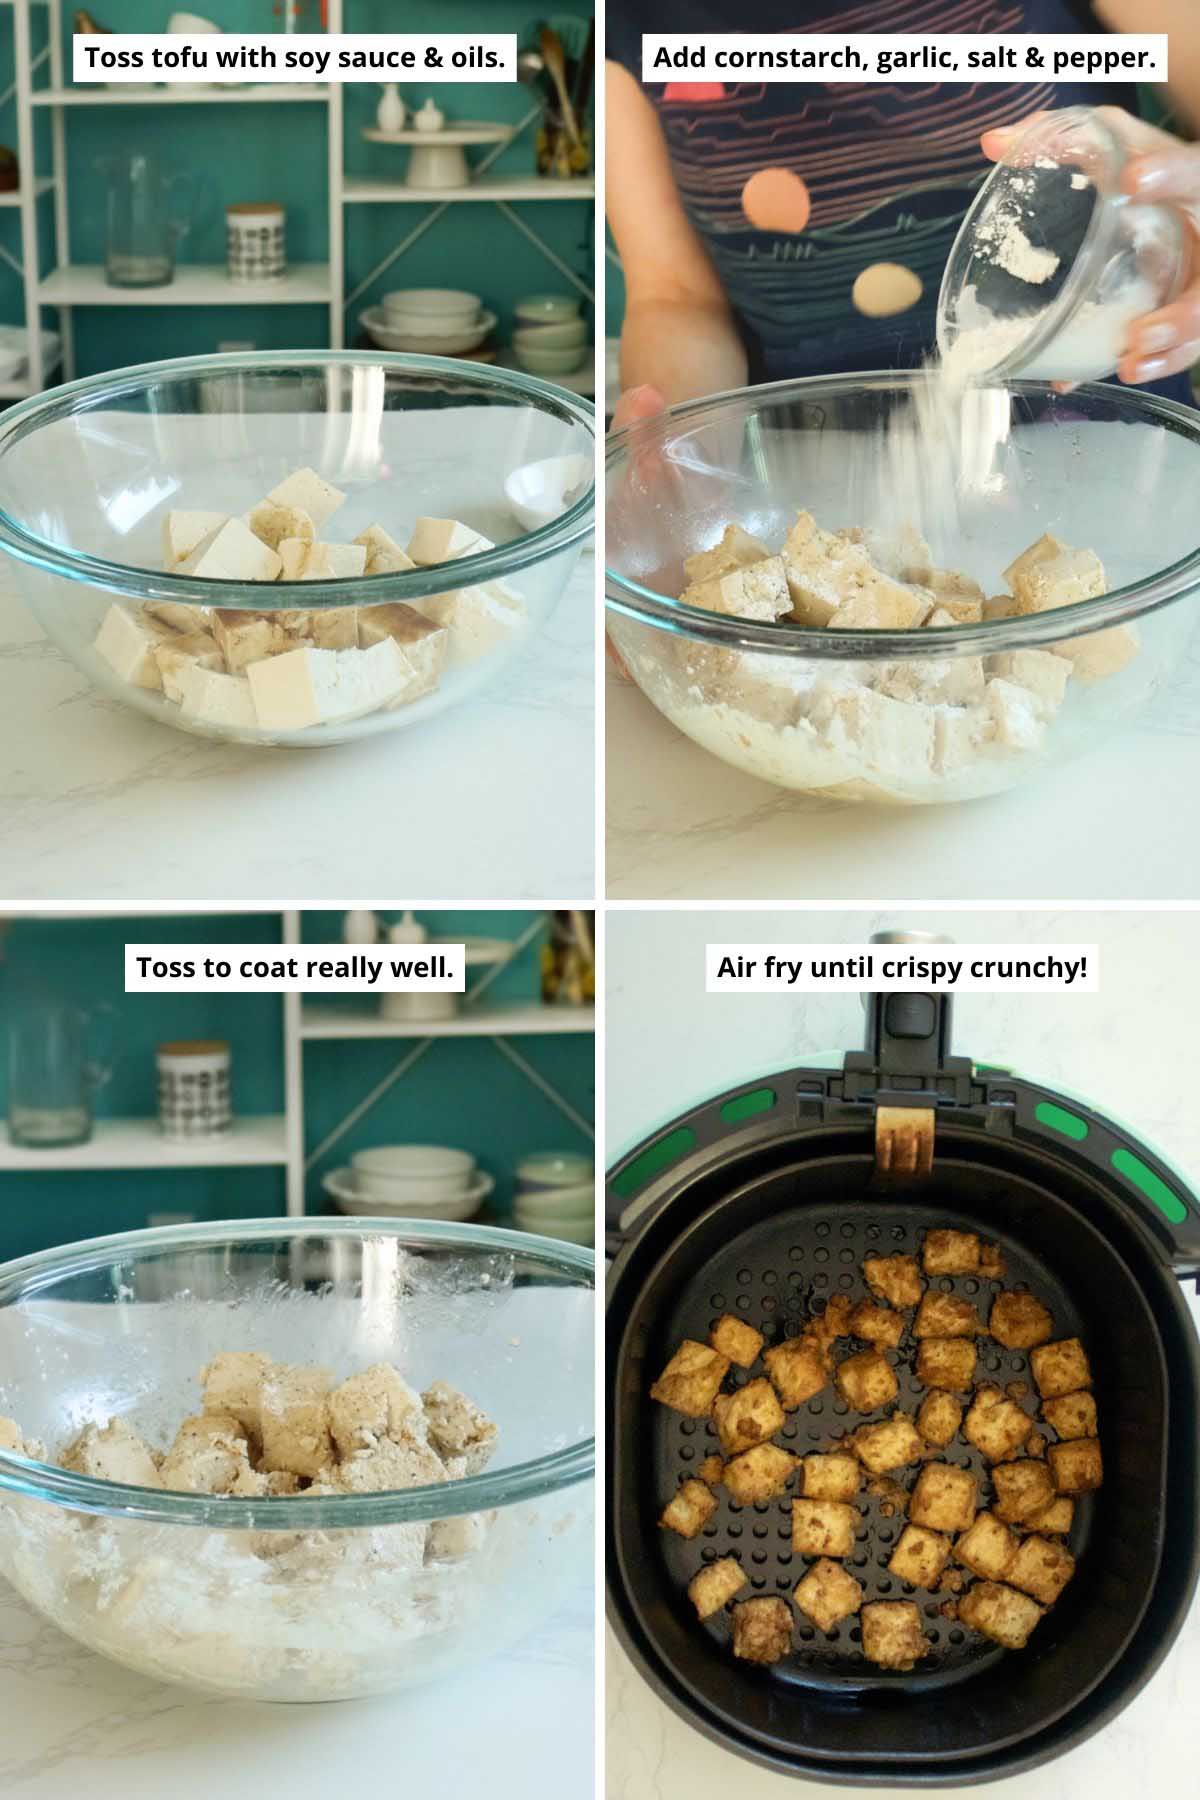 image collage showing the tofu tossed in oils and soy sauce, adding the cornstarch and the tofu after tossing in the cornstarch, and the cooked salt and pepper tofu in the air fryer basket